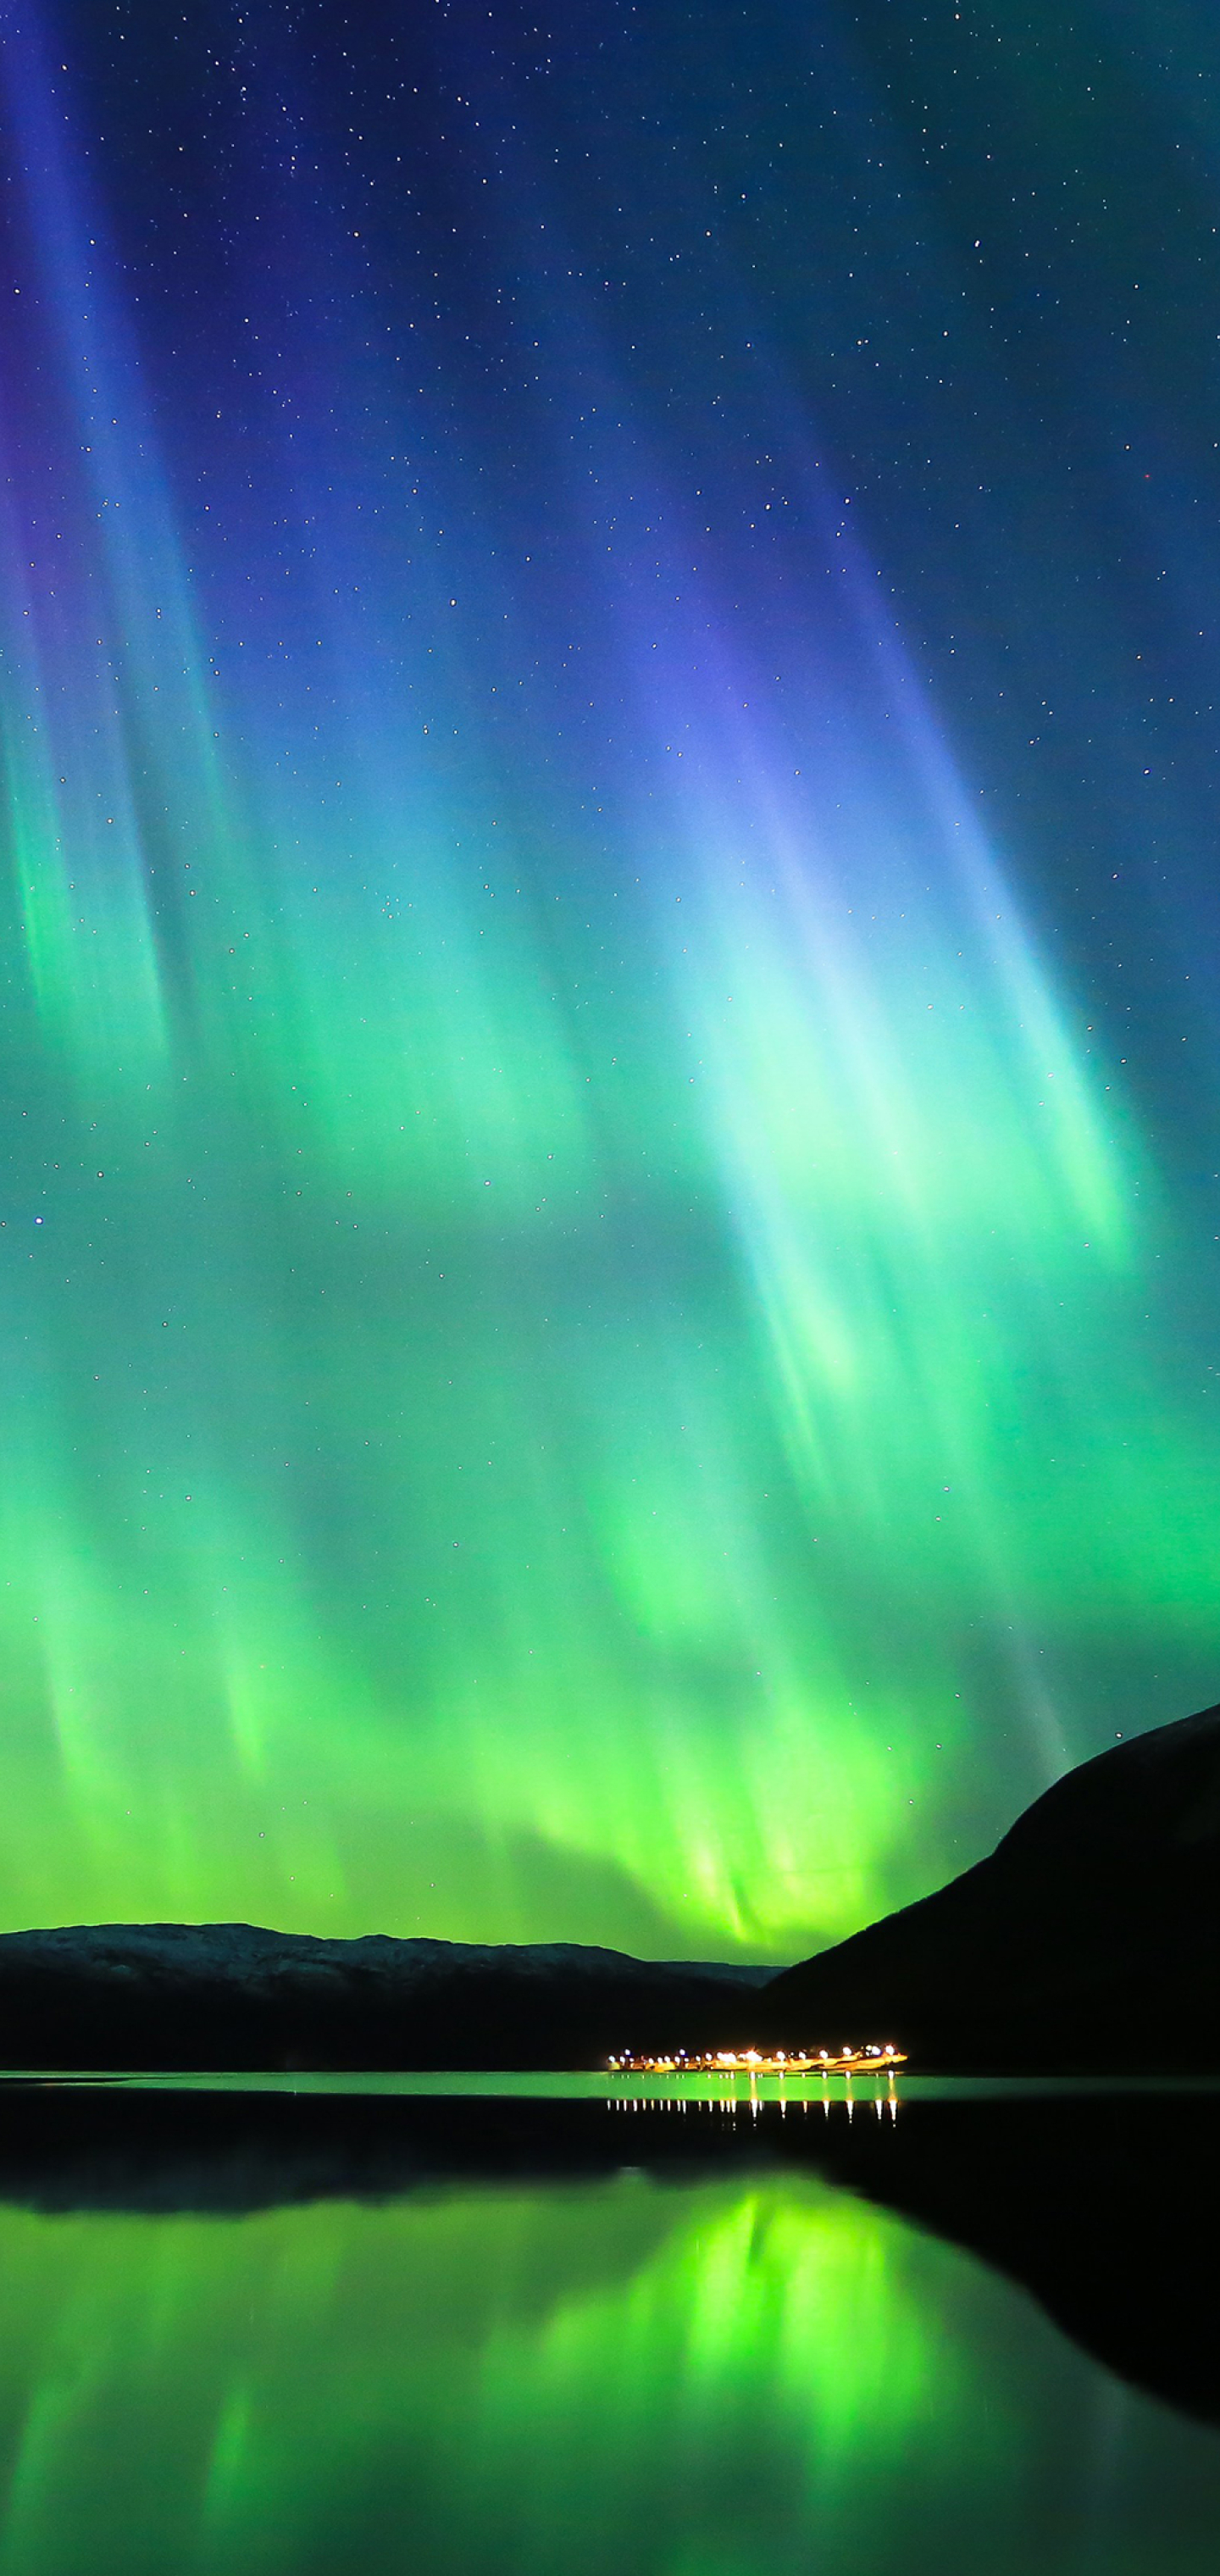 1440x3040 Aurora 4k 1440x3040 Resolution Wallpaper Hd Nature 4k Wallpapers Images Photos And Background